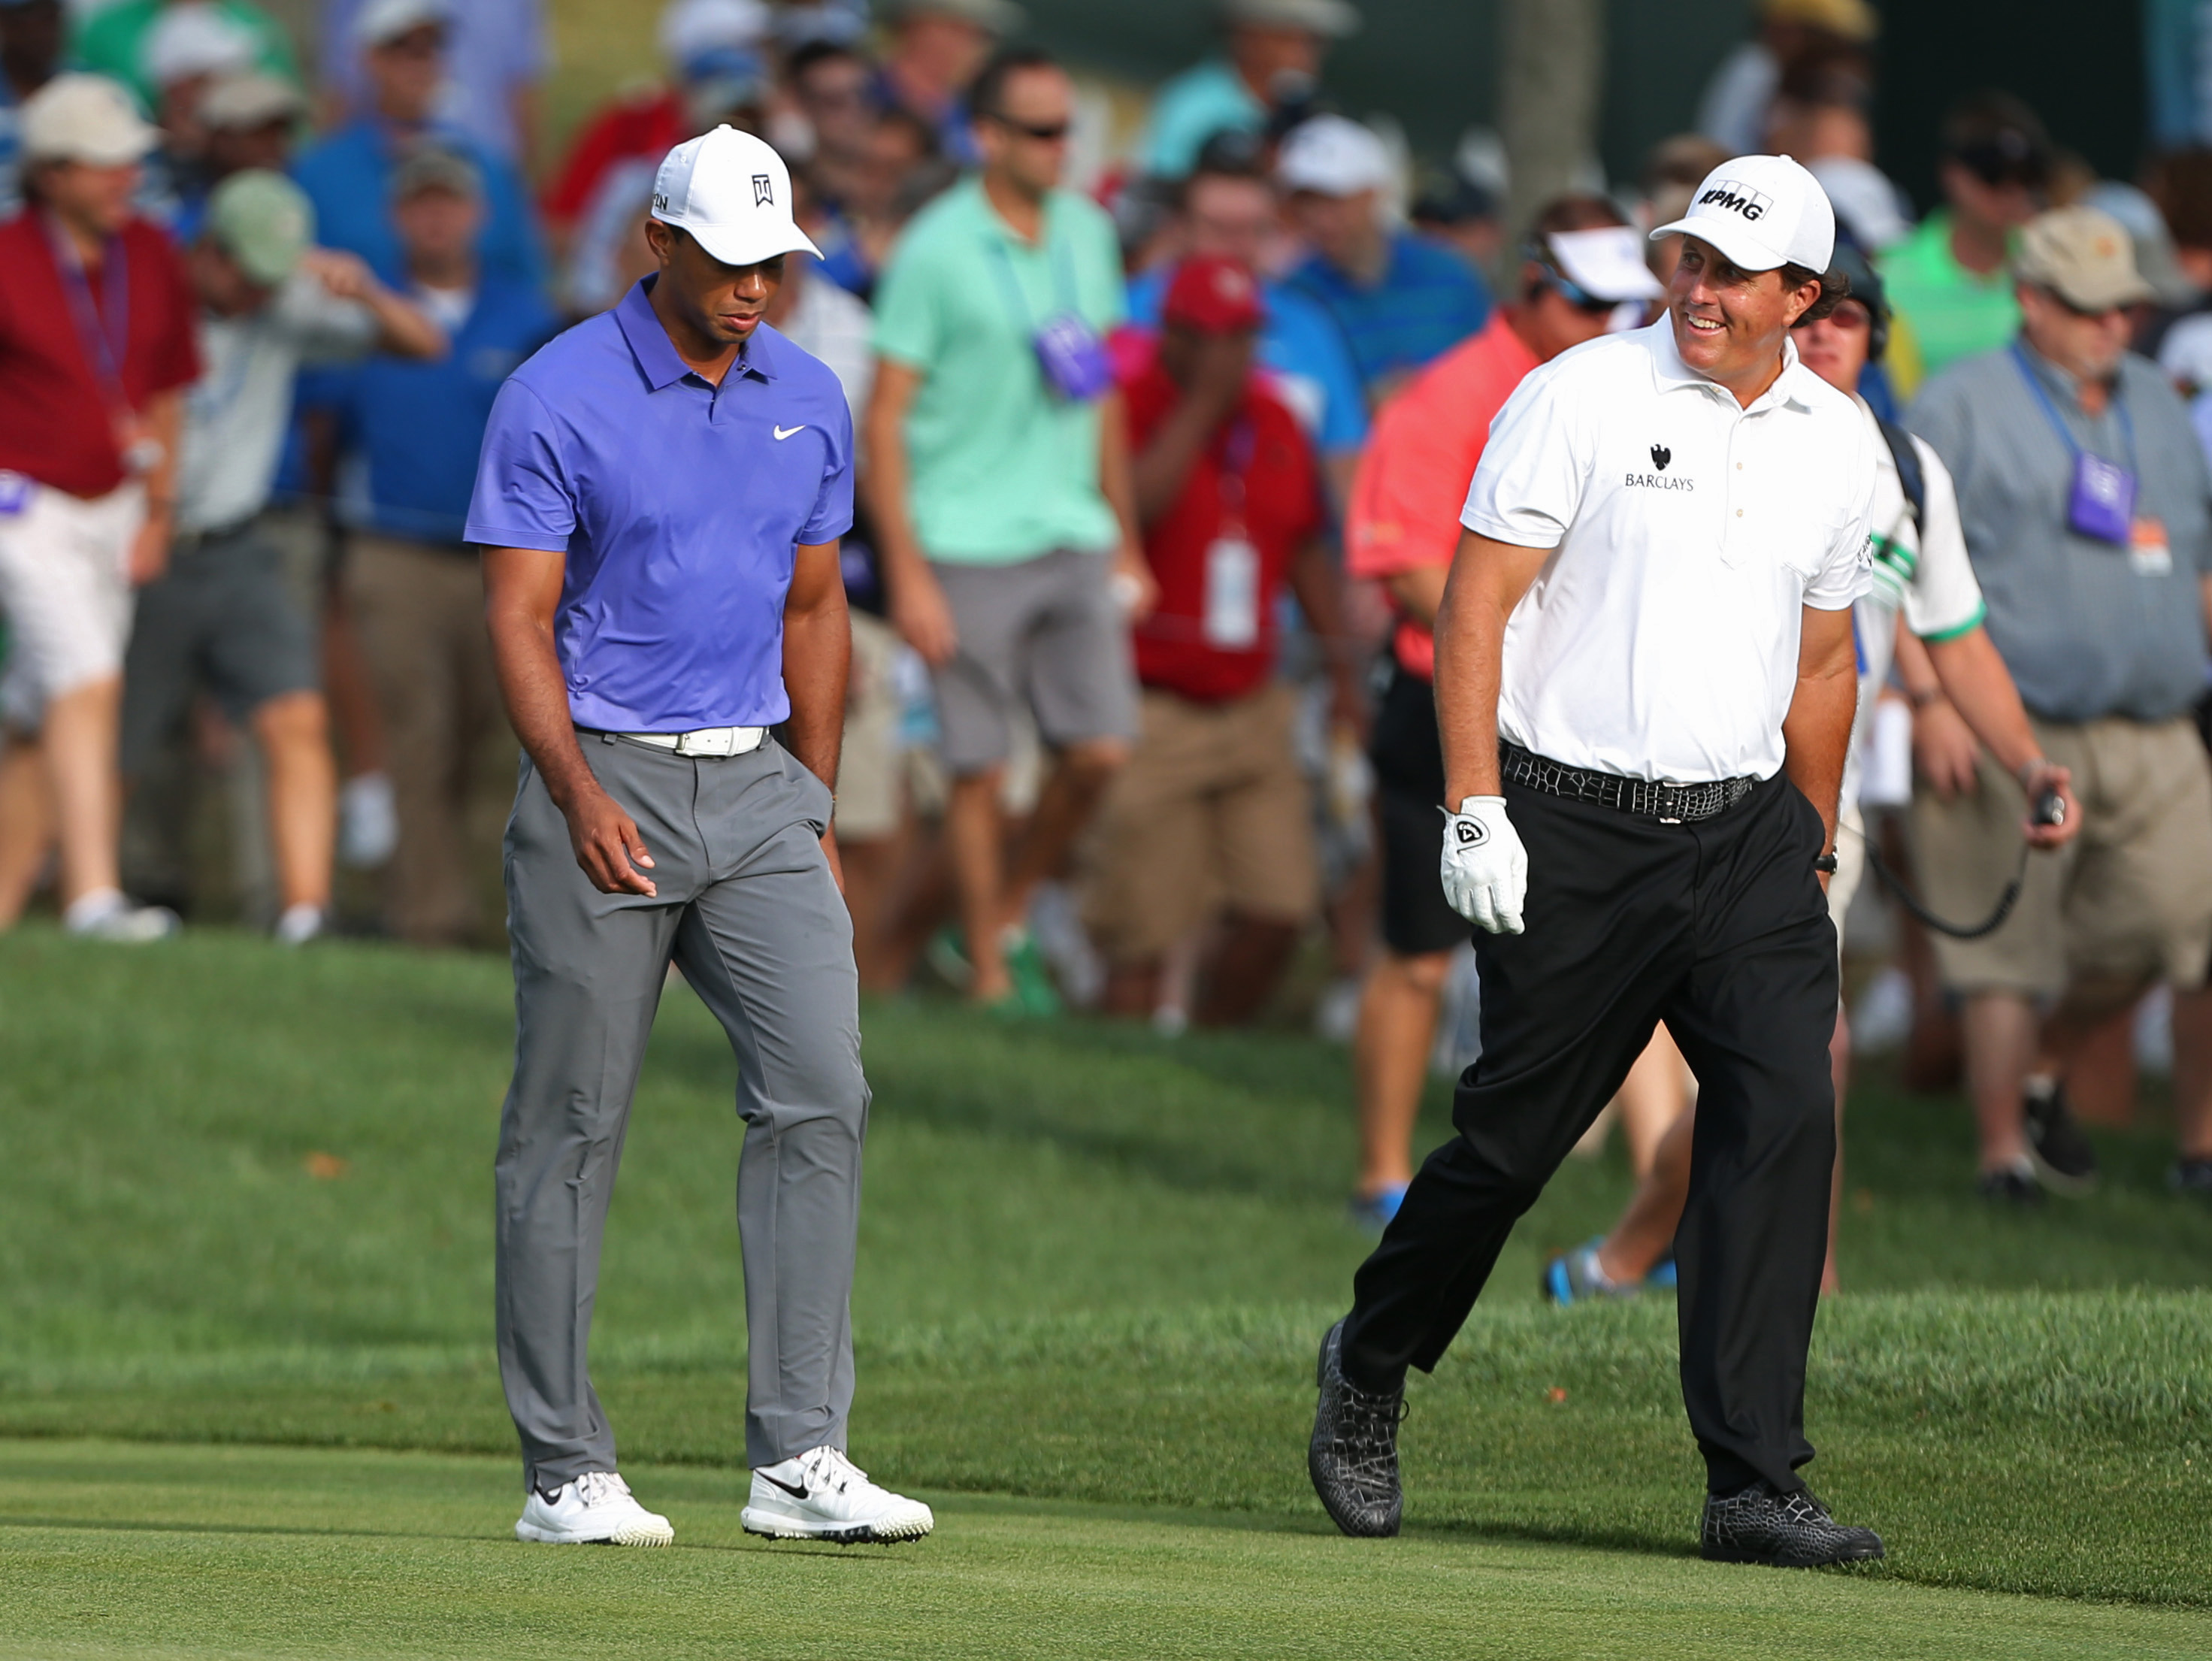 A Masters for the aged? Tiger Woods and Phil Mickelson hope so